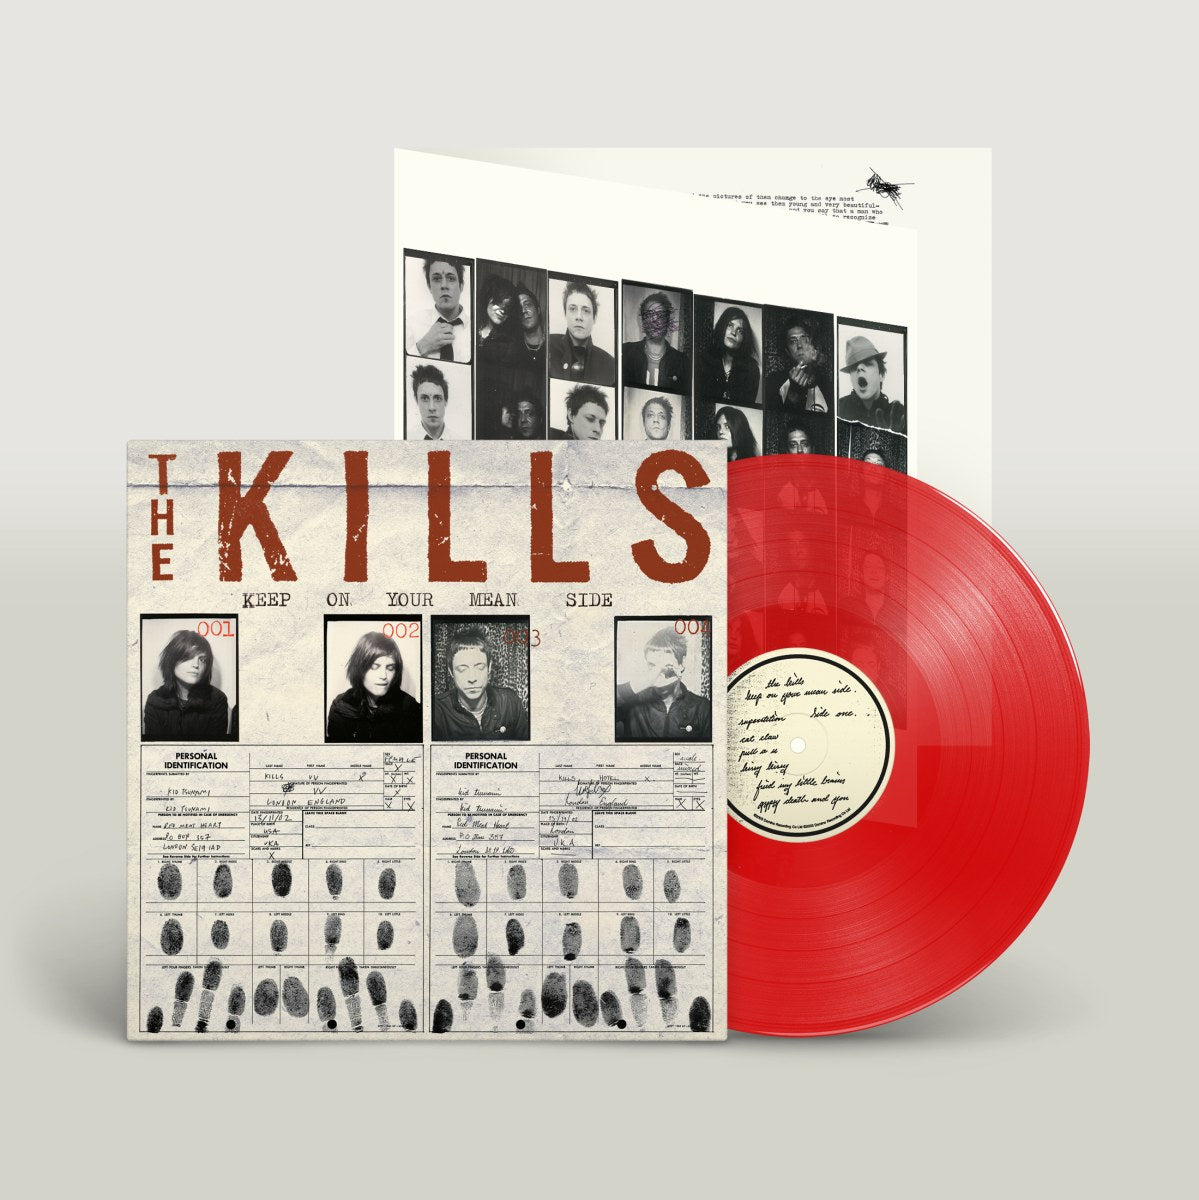 The Kills – Keep On Your Mean Side LP (20th Anniversary Transparent Red Vinyl)